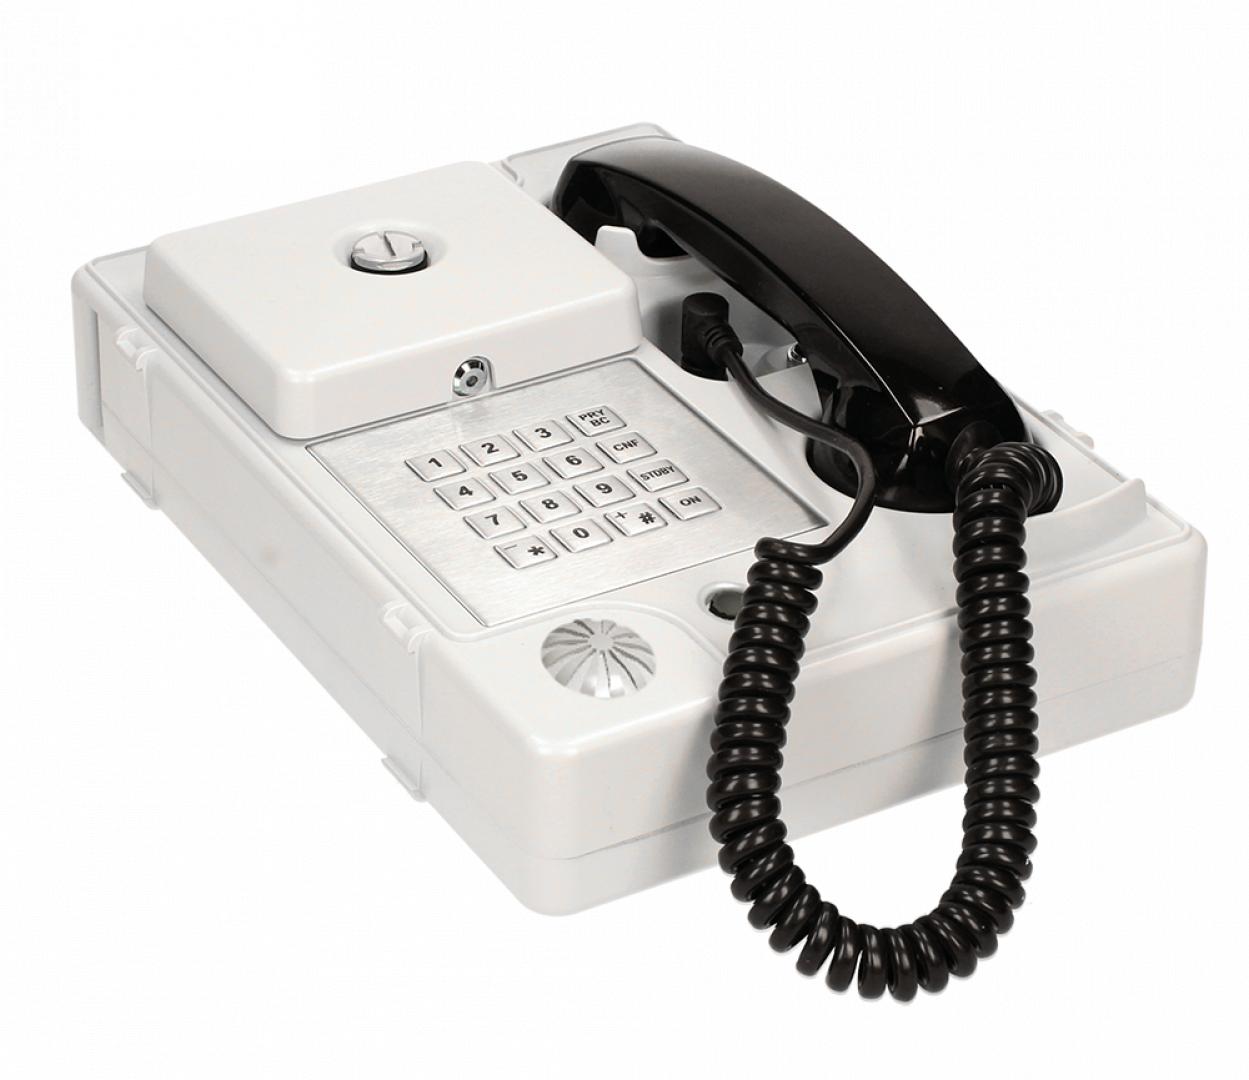 APM-40 muxed field telephone terminal has embeded also full PBX functionality, which means that the system works without any central unit (PBX, Central Battery). The housing is from very robust polycarbonate and is IP67 certified.